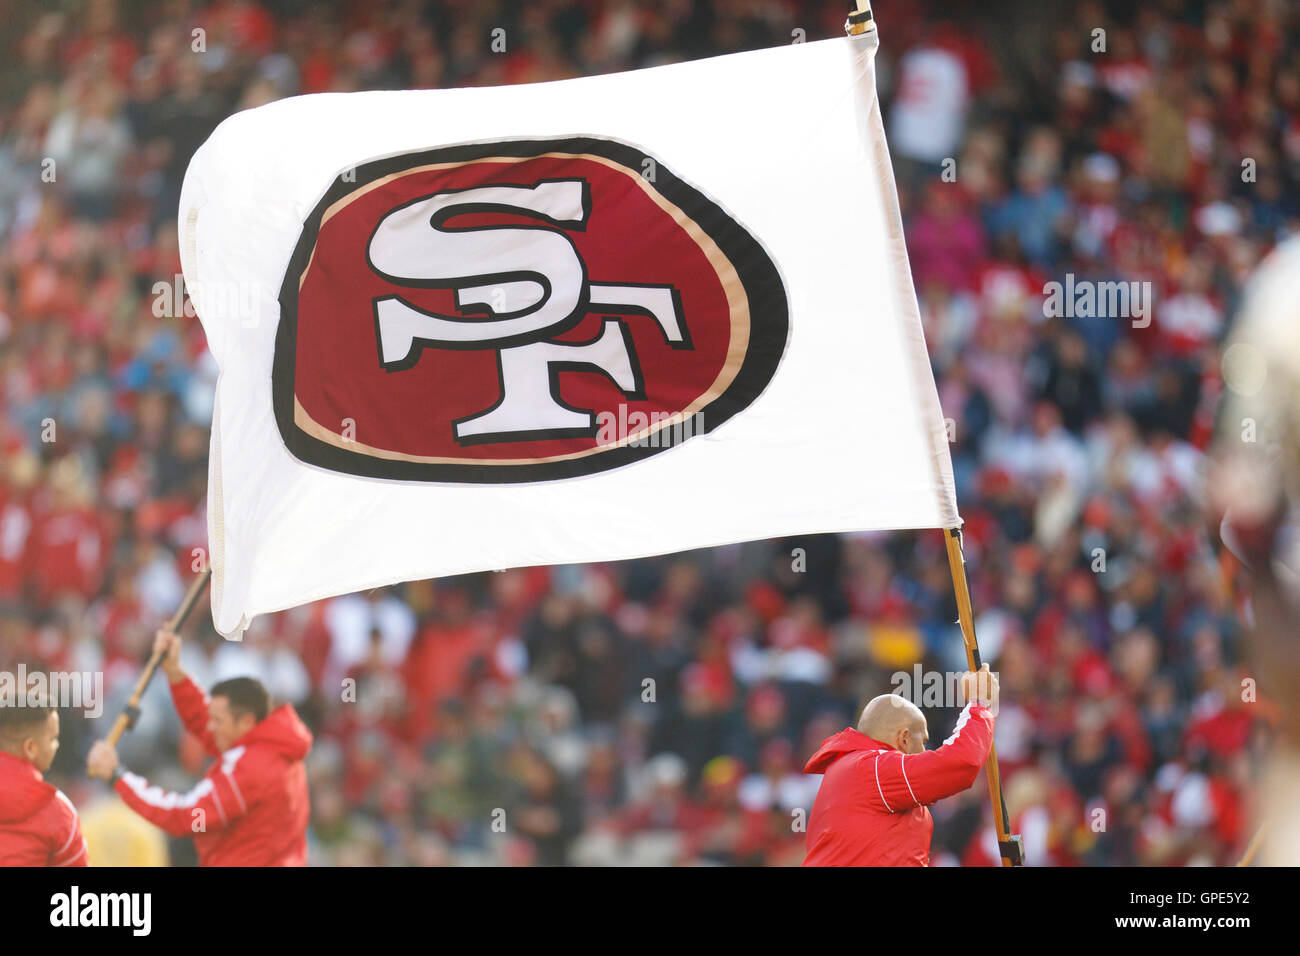 Nov 20, 2011; San Francisco, CA, USA; A San Francisco 49ers flag is waved on the field after a touchdown was scored against the Arizona Cardinals during the third quarter at Candlestick Park. Stock Photo